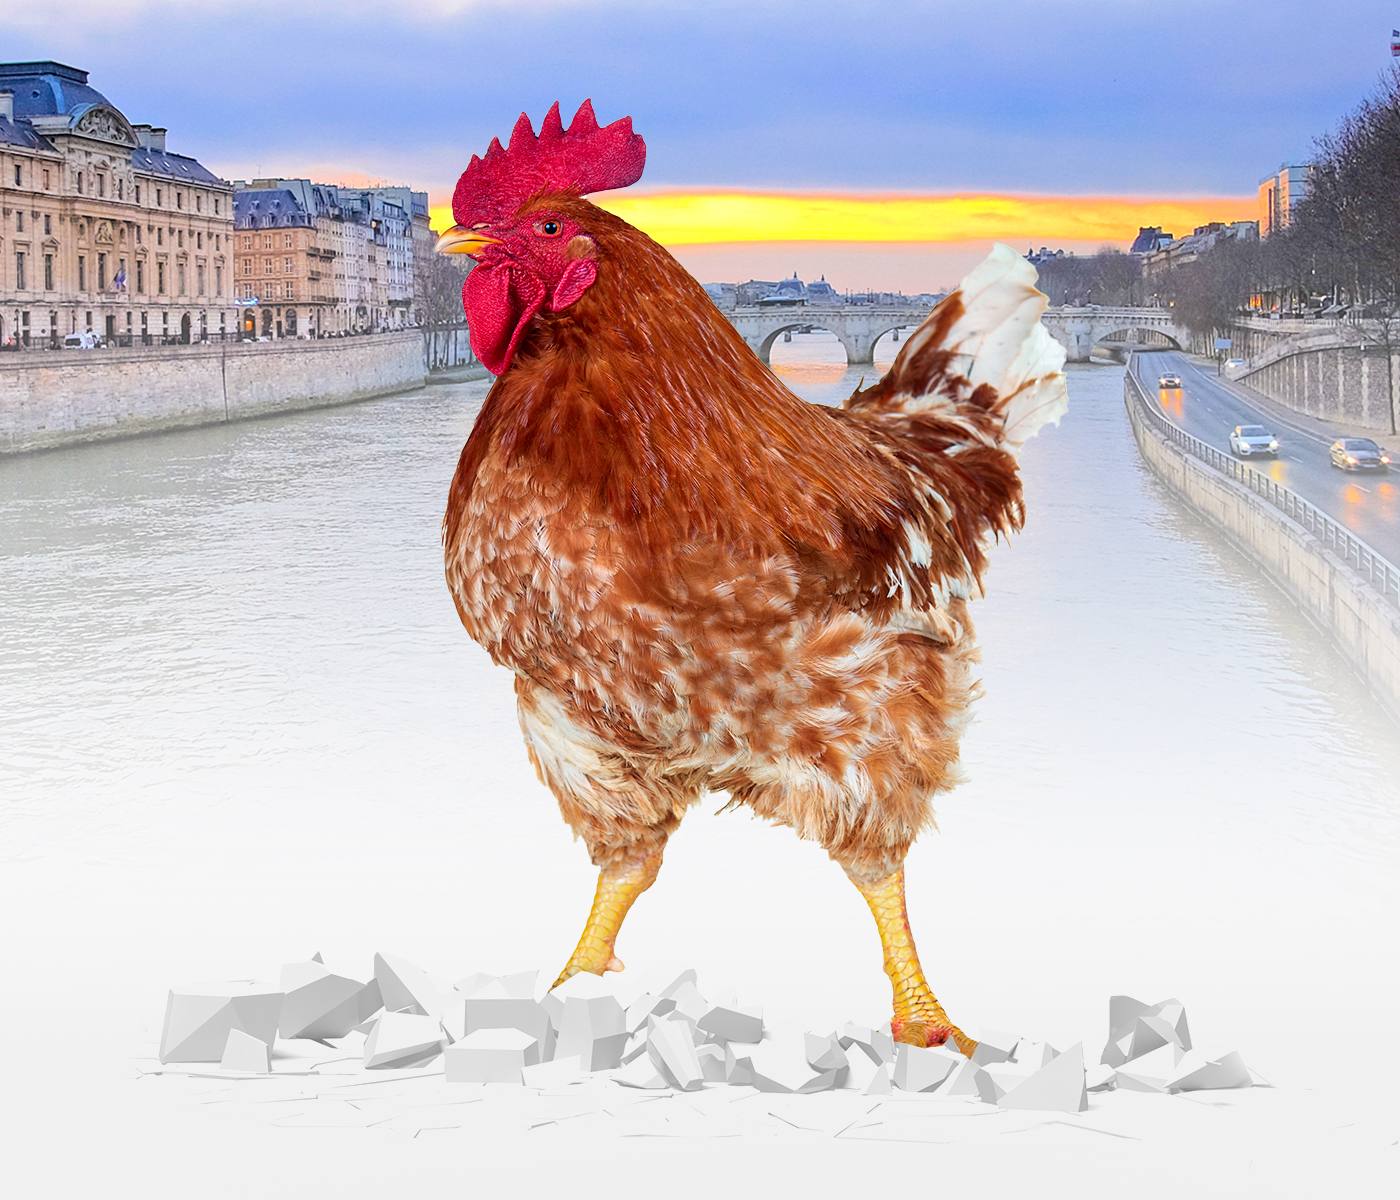 World’s Poultry Congress 2022